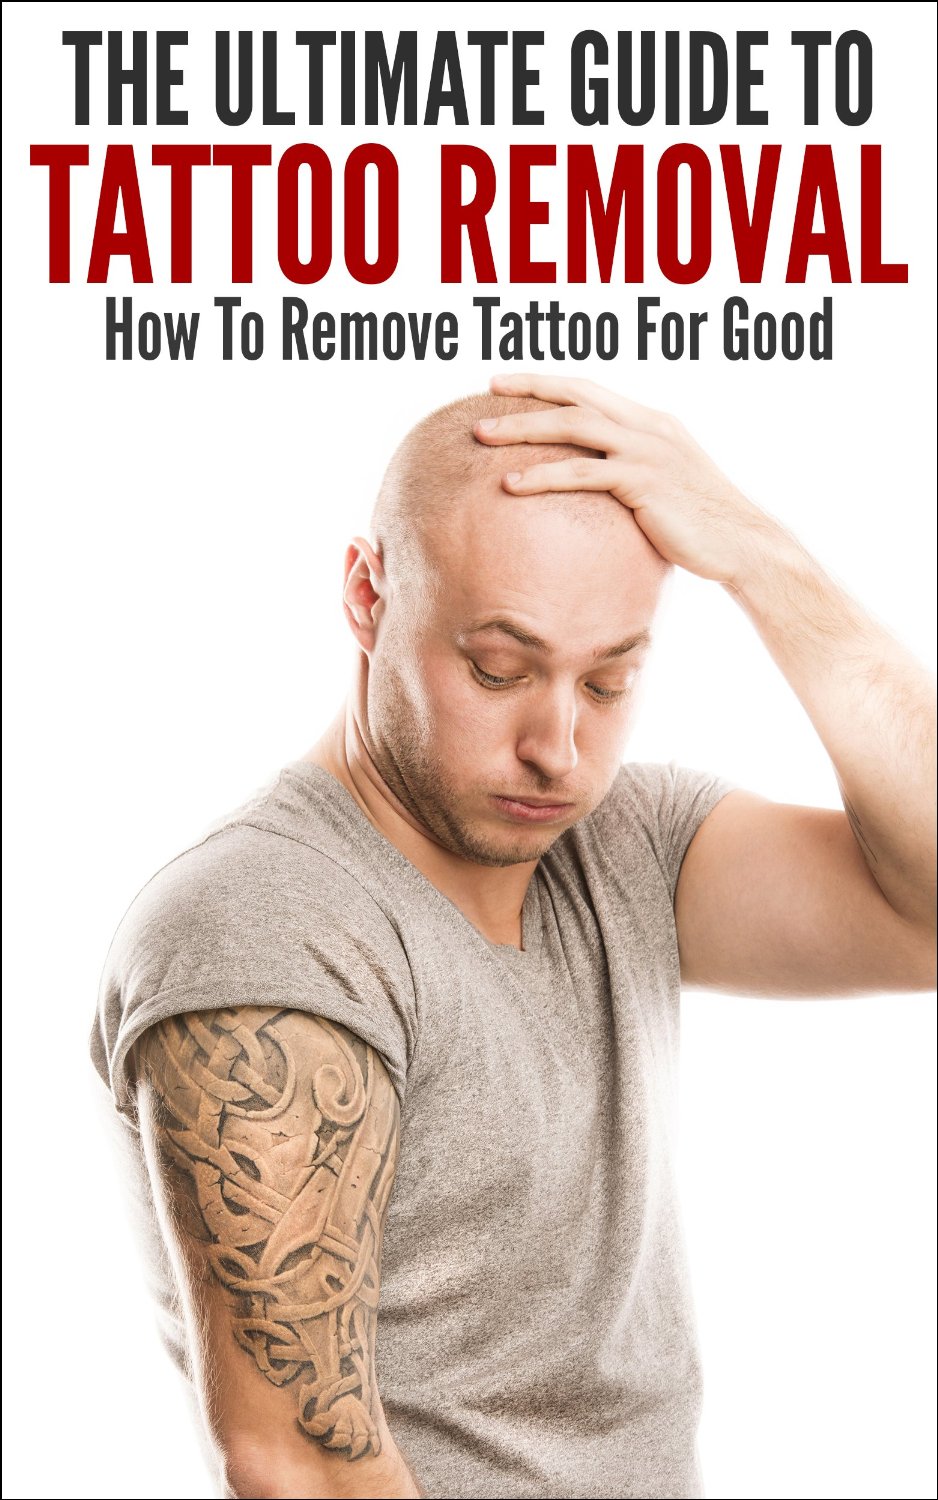 The Ultimate Guide To Tattoo Removal: How To Remove Tattoo For Good by John K.